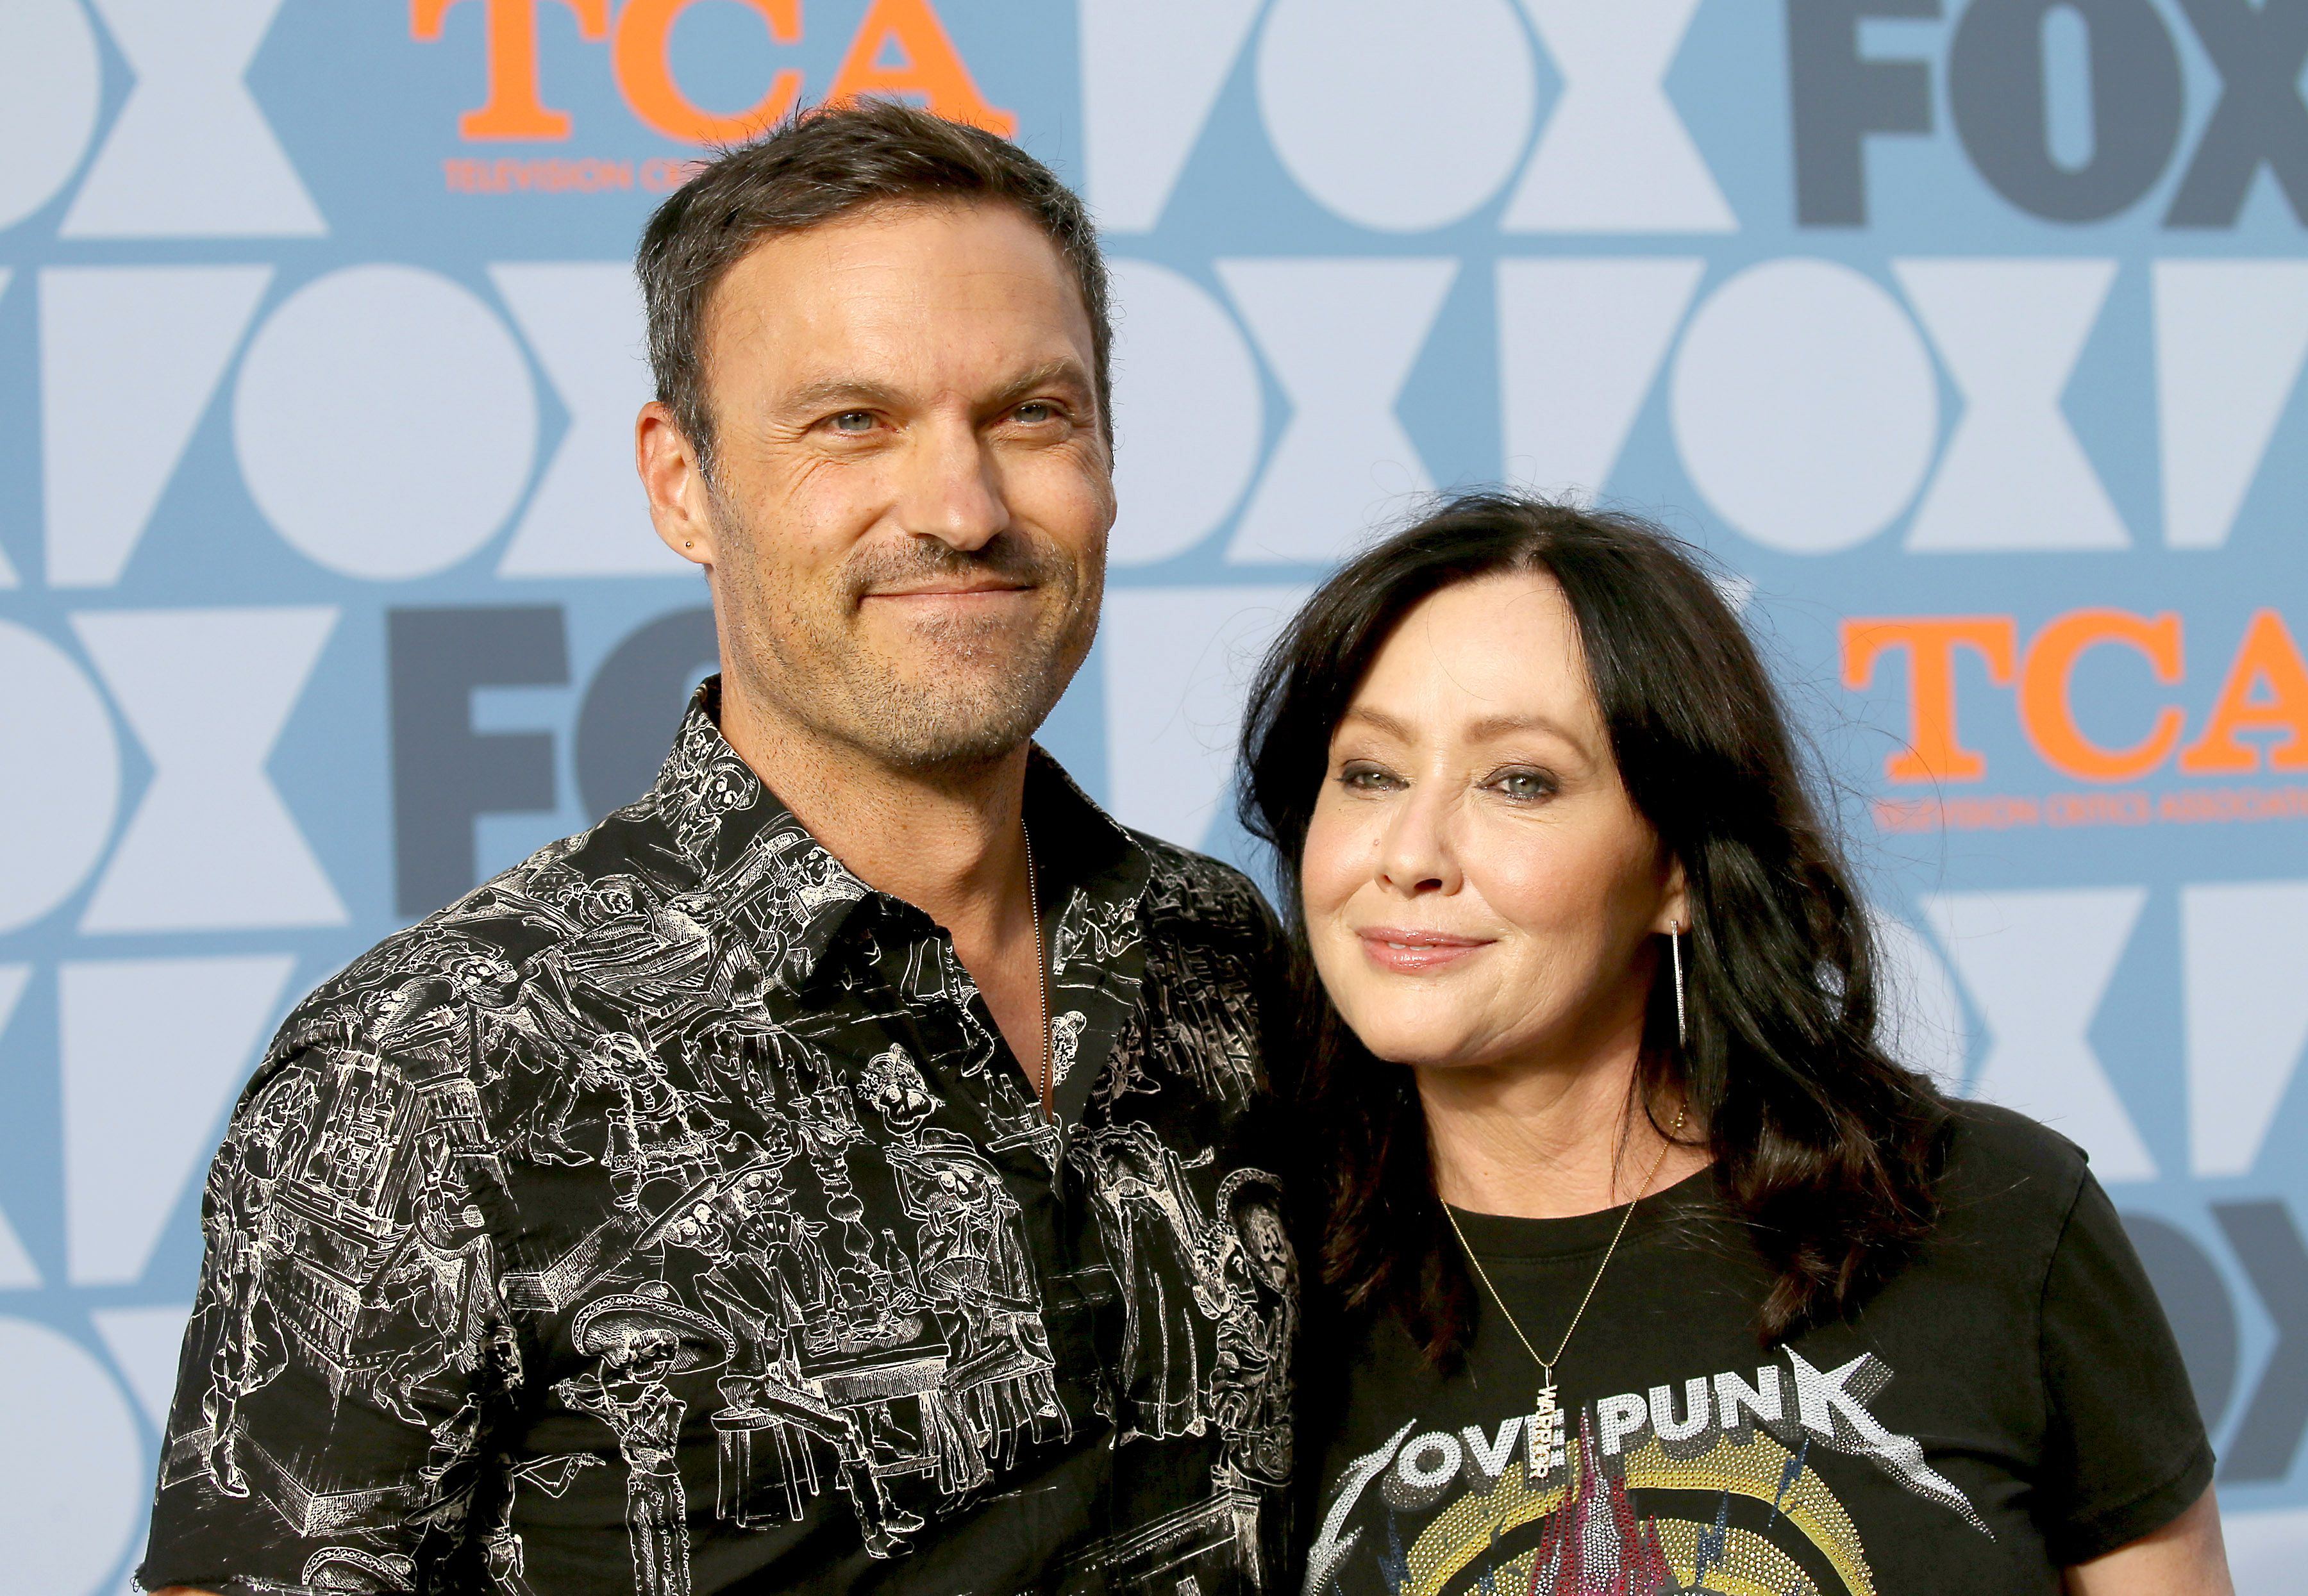 Shannen Doherty and Brian Austin Green, both accomplished US actors, grace the FOX Summer TCA 2019 All-Star Party at Fox Studios in Los Angeles on August 7, 2019 | Source: Getty Images